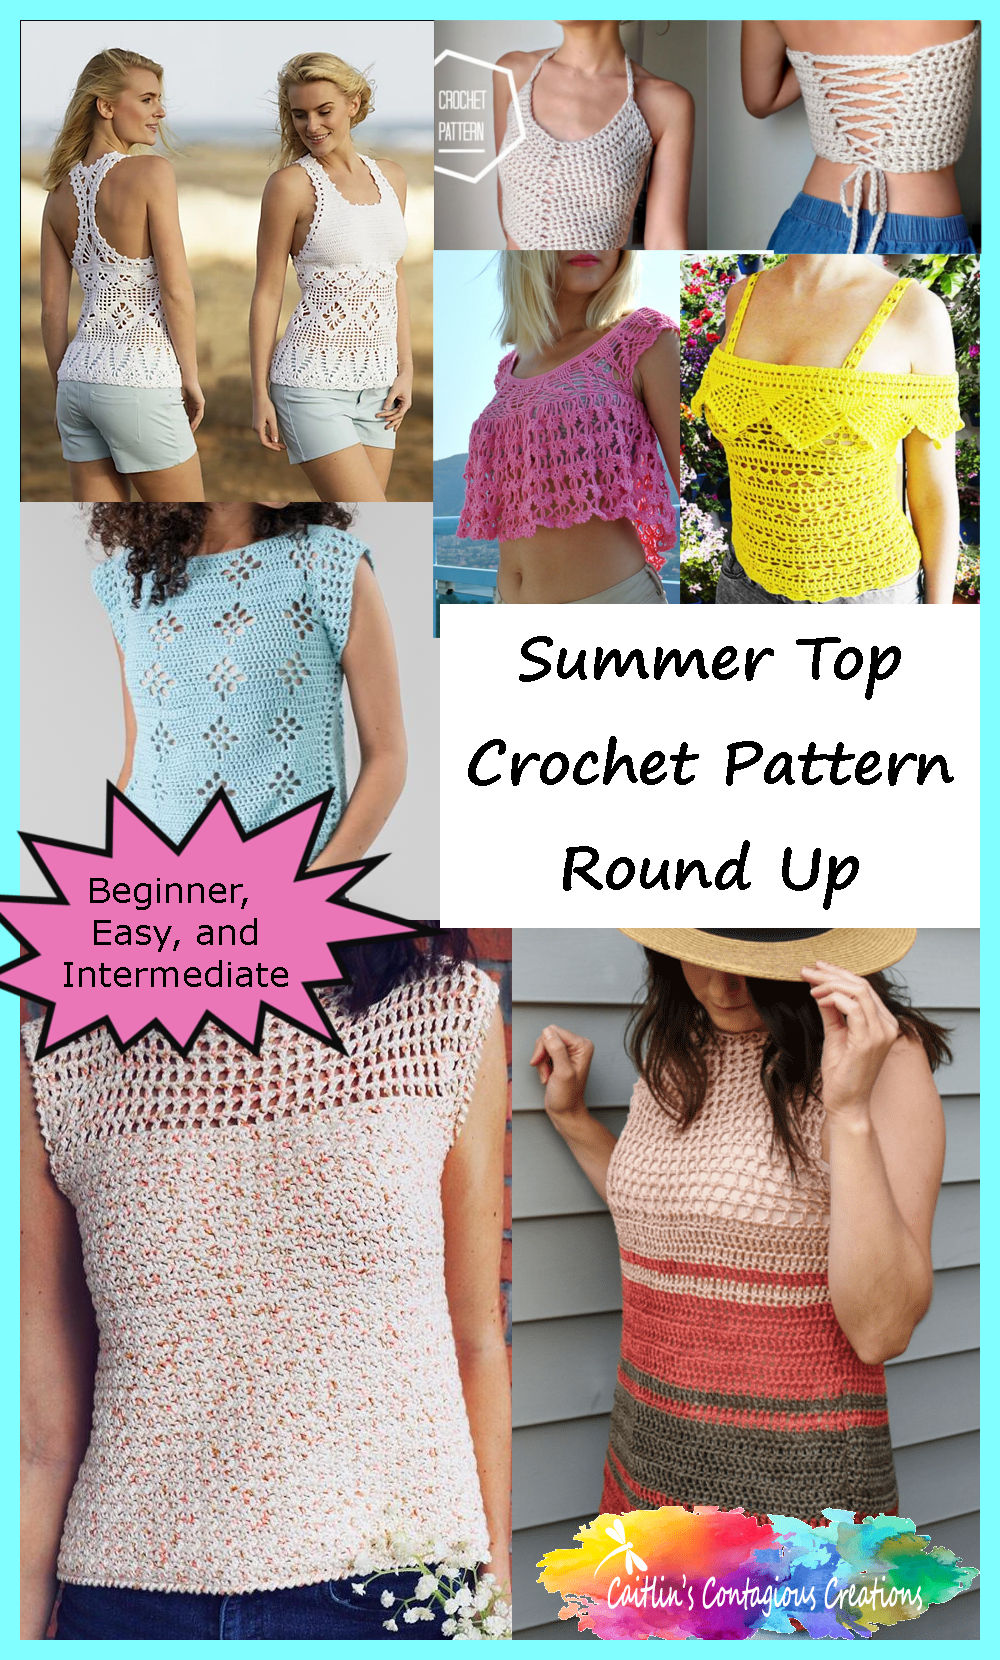 Summer Top Crochet Pattern Round Up From Caitlin's Contagious Creations. Includes free and premium patterns for beginner, easy, and intermediate levels. A fun collection of tees, tanks, halters, and cover ups that are classy, simple and elegant. Browse these women's shirts today! #SummerTopCrochetPattern #CrochetPatternCollection #ShirtCrochetPattern